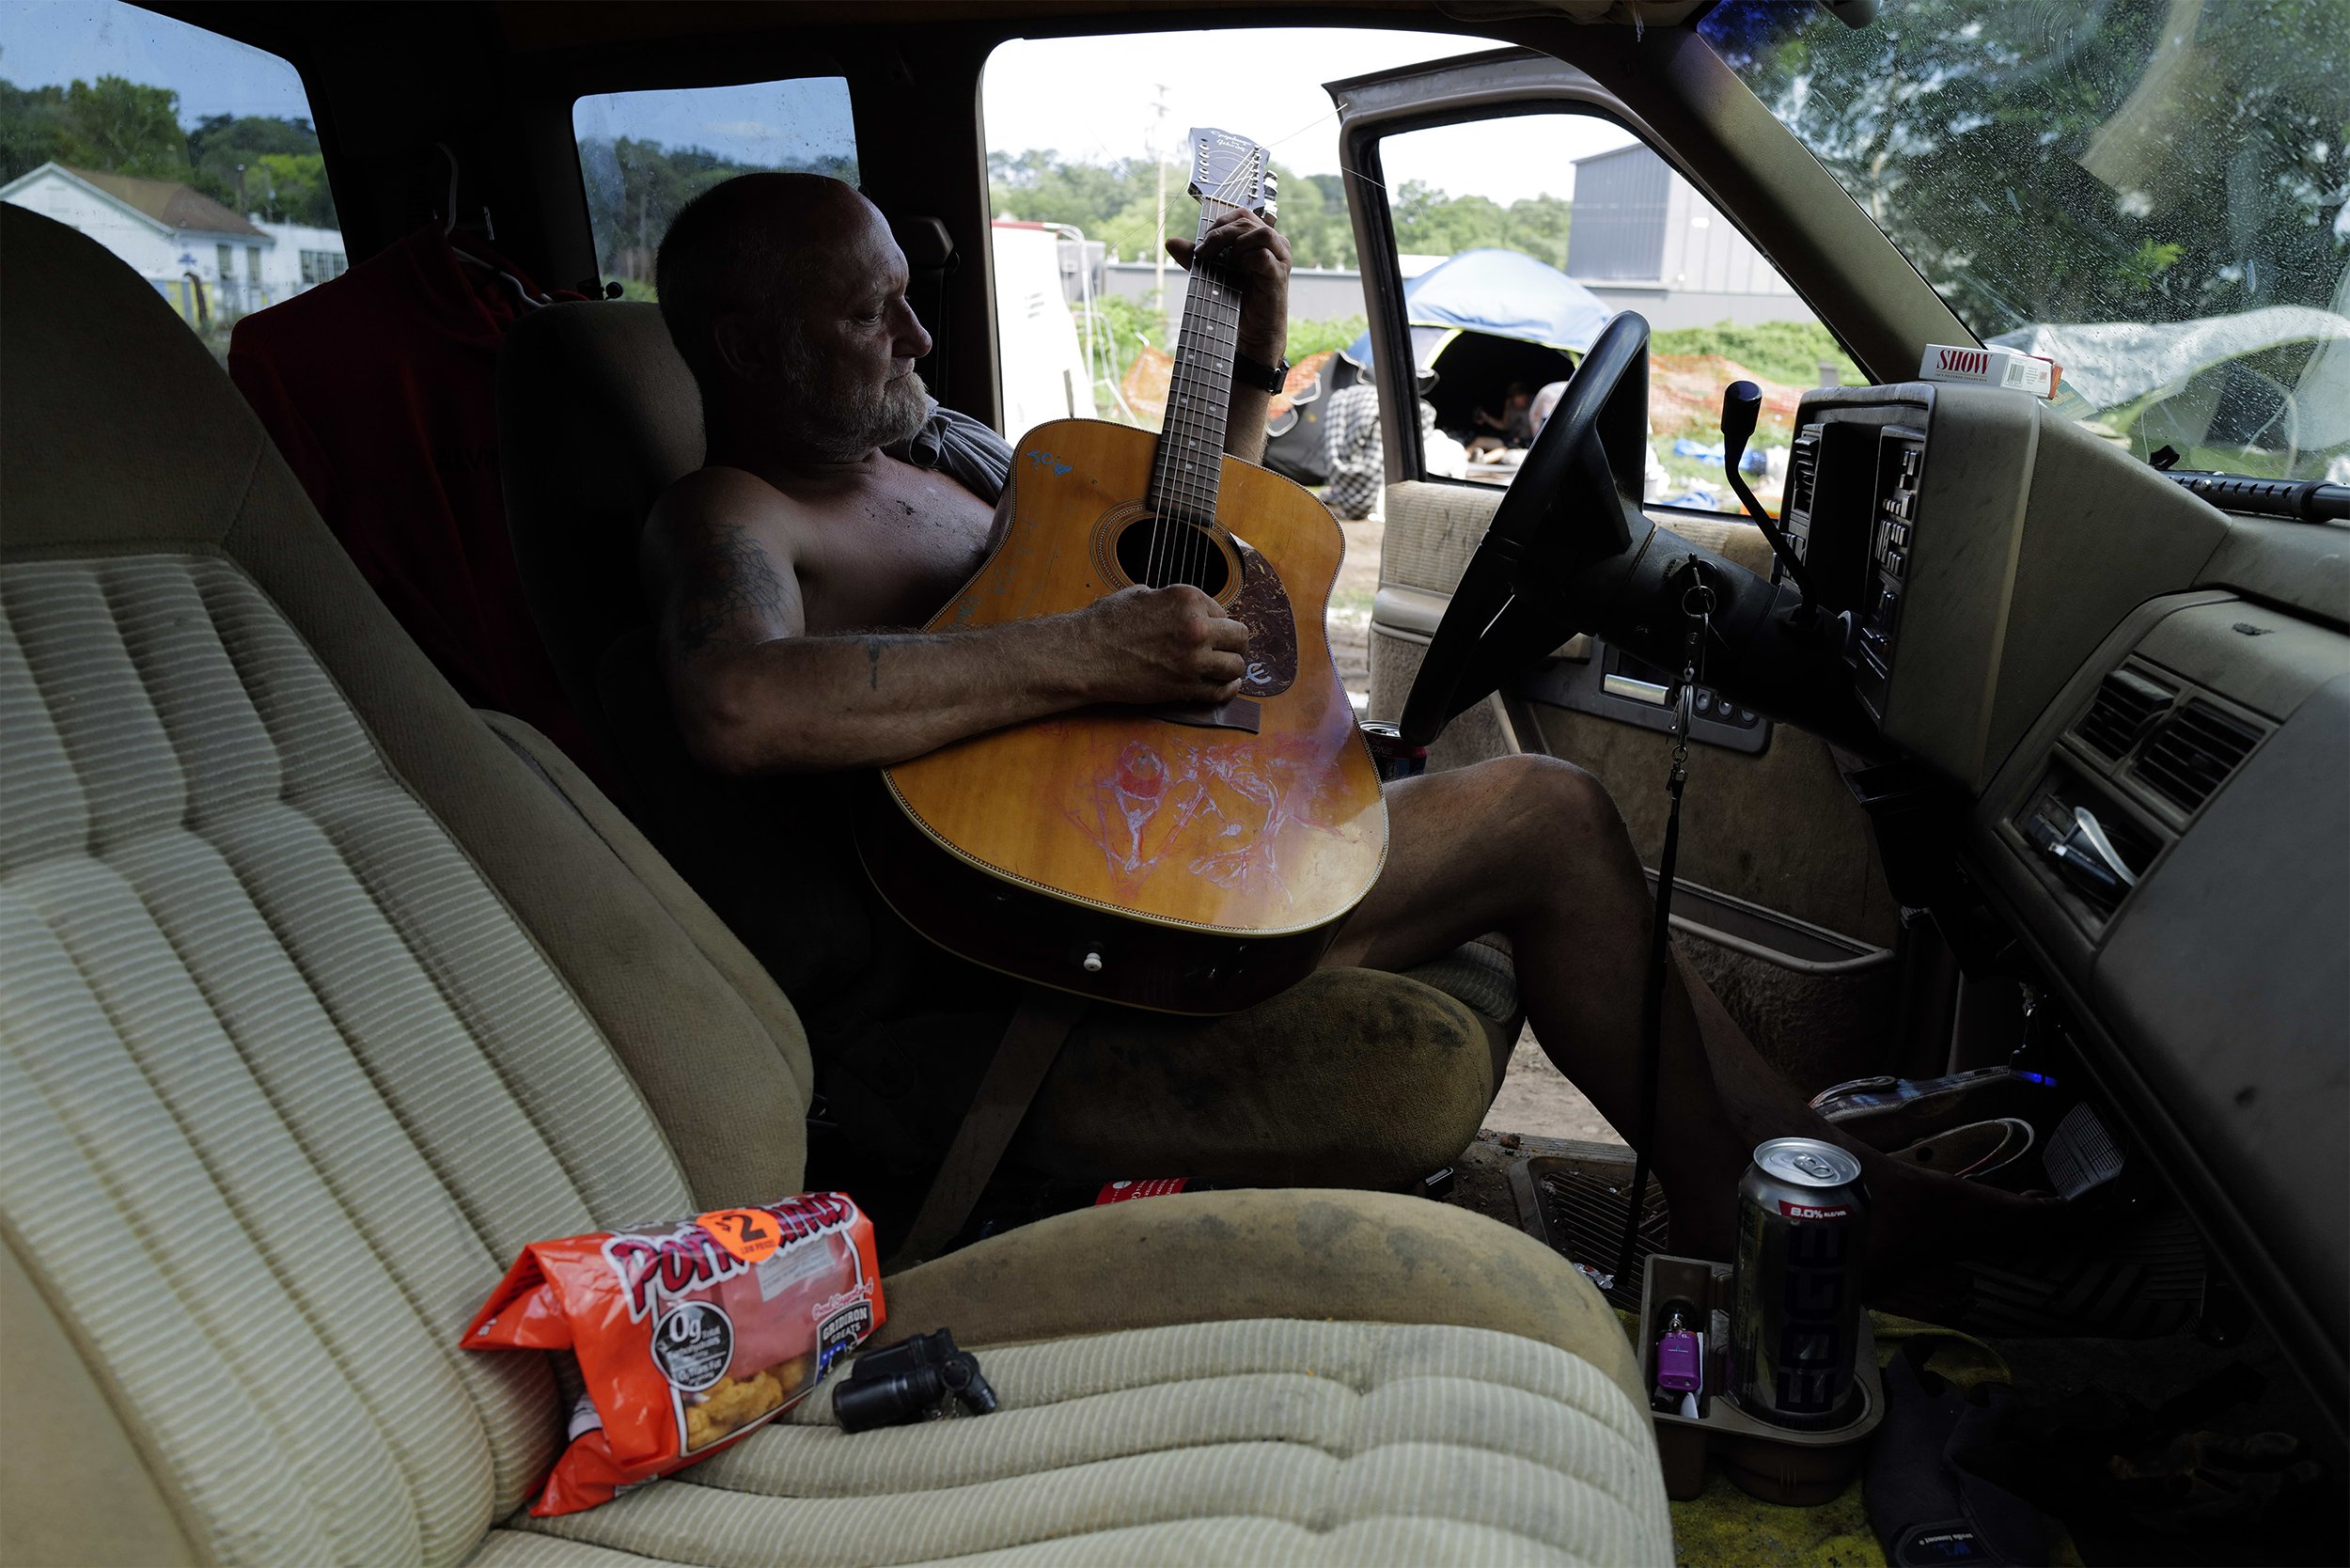  Michael Stanfill, 61, plays guitar in his car at the Ampersee Avenue homeless encampment in Kalamazoo on Wednesday, August 25, 2021. Residents were ultimately evicted from the encampment in the months of September and October with the city having no